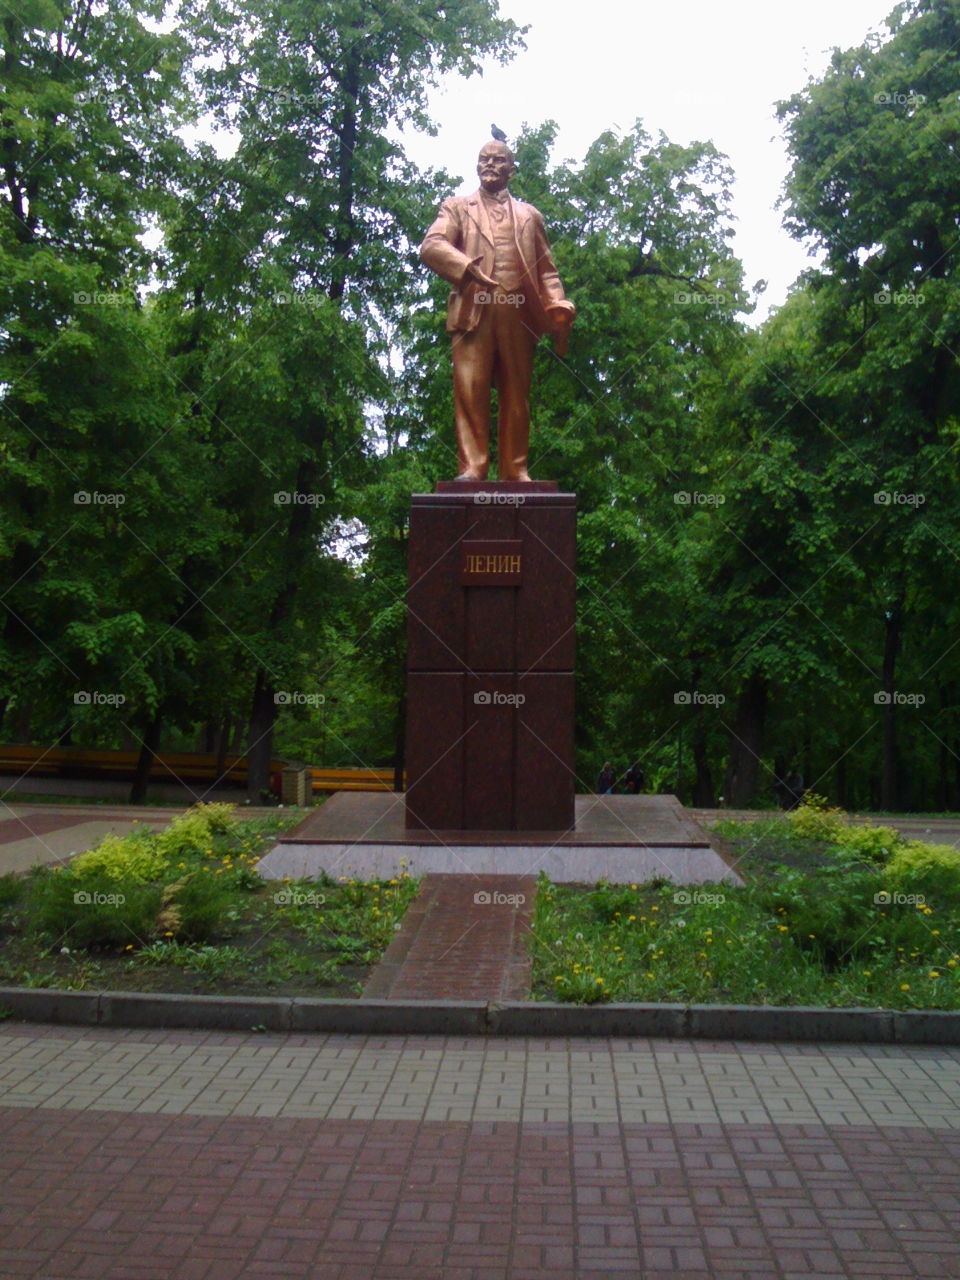 View of statue in park